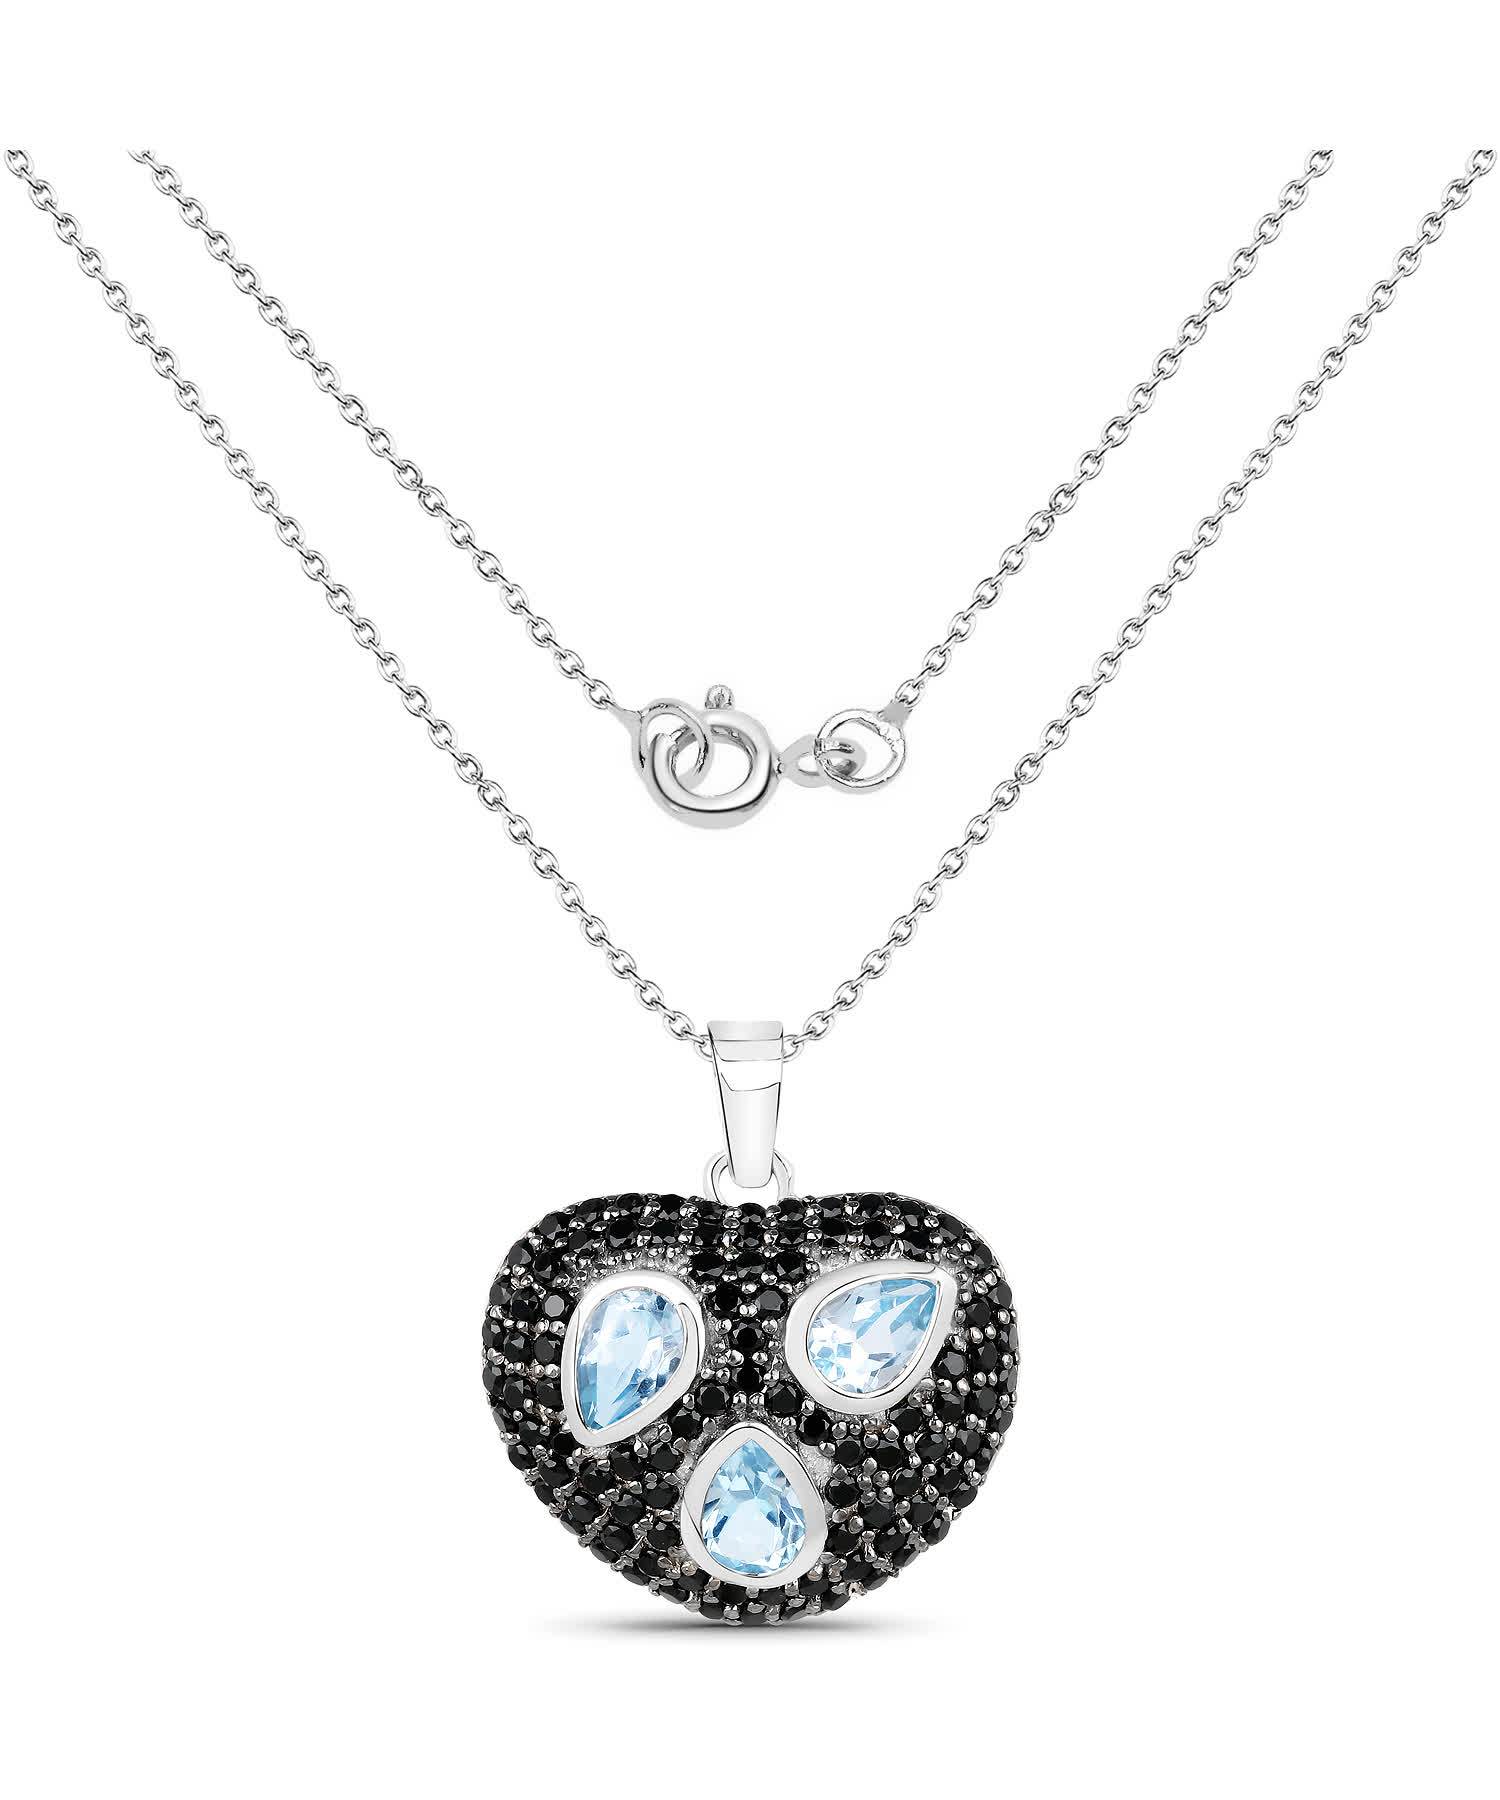 3.39ctw Natural Sky Blue Topaz and Black Spinel Rhodium Plated 925 Sterling Silver Heart Pendant With Chain View 2